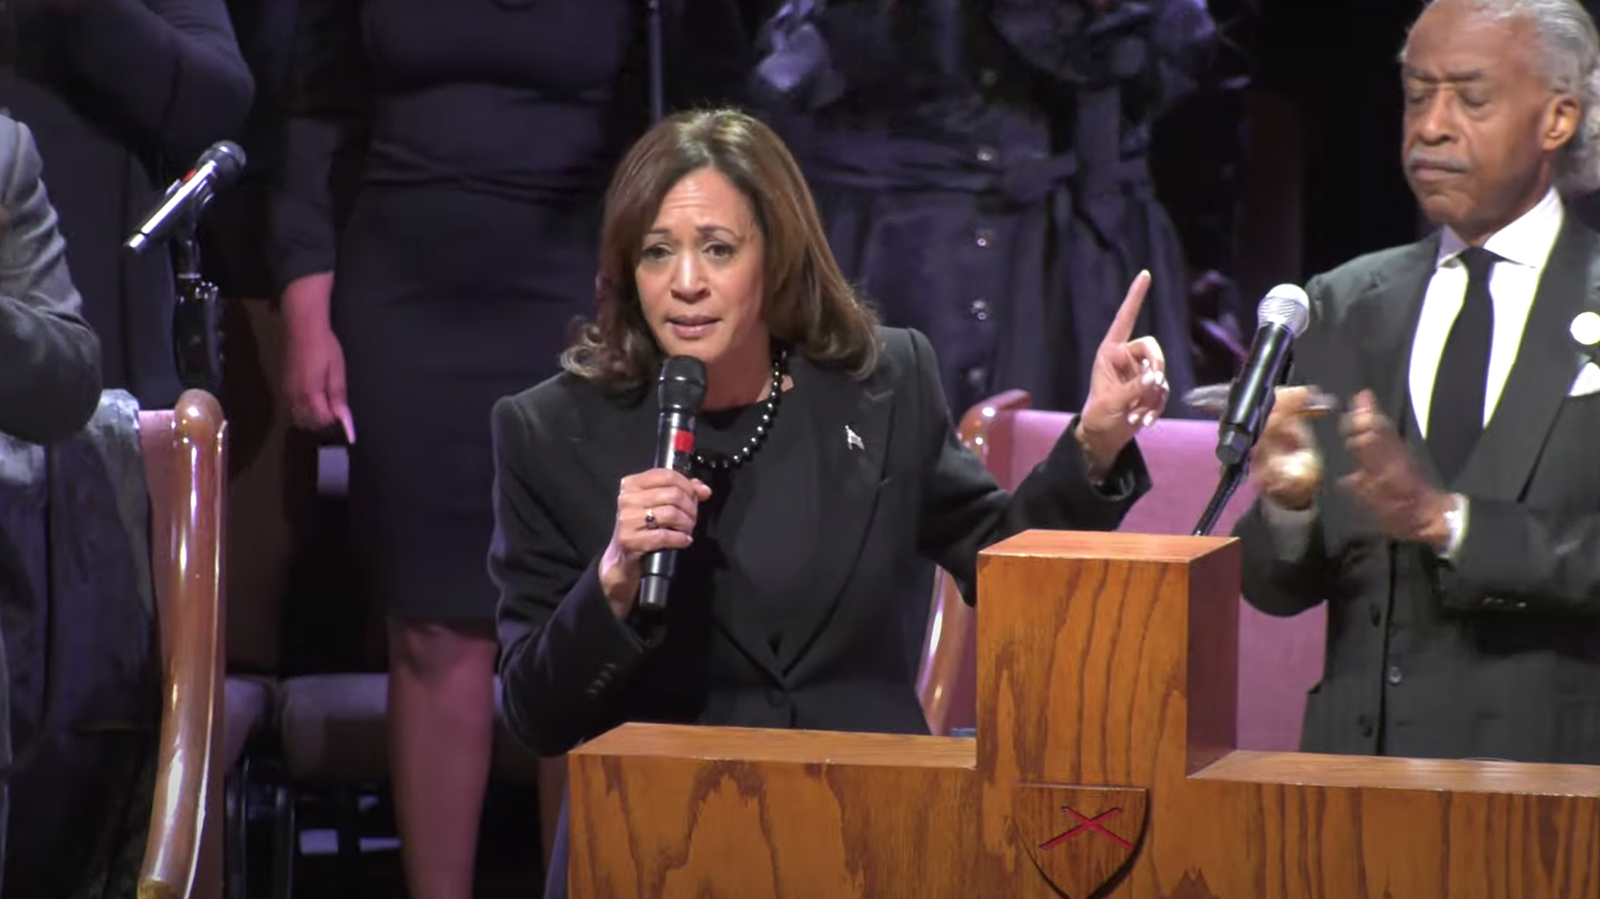 Vice President Kamala Harris speaks during the funeral service for Tyre Nichols at Mississippi Boulevard Christian Church on Wed., Feb. 1, 2023, in Memphis, Tenn. Video screen grab